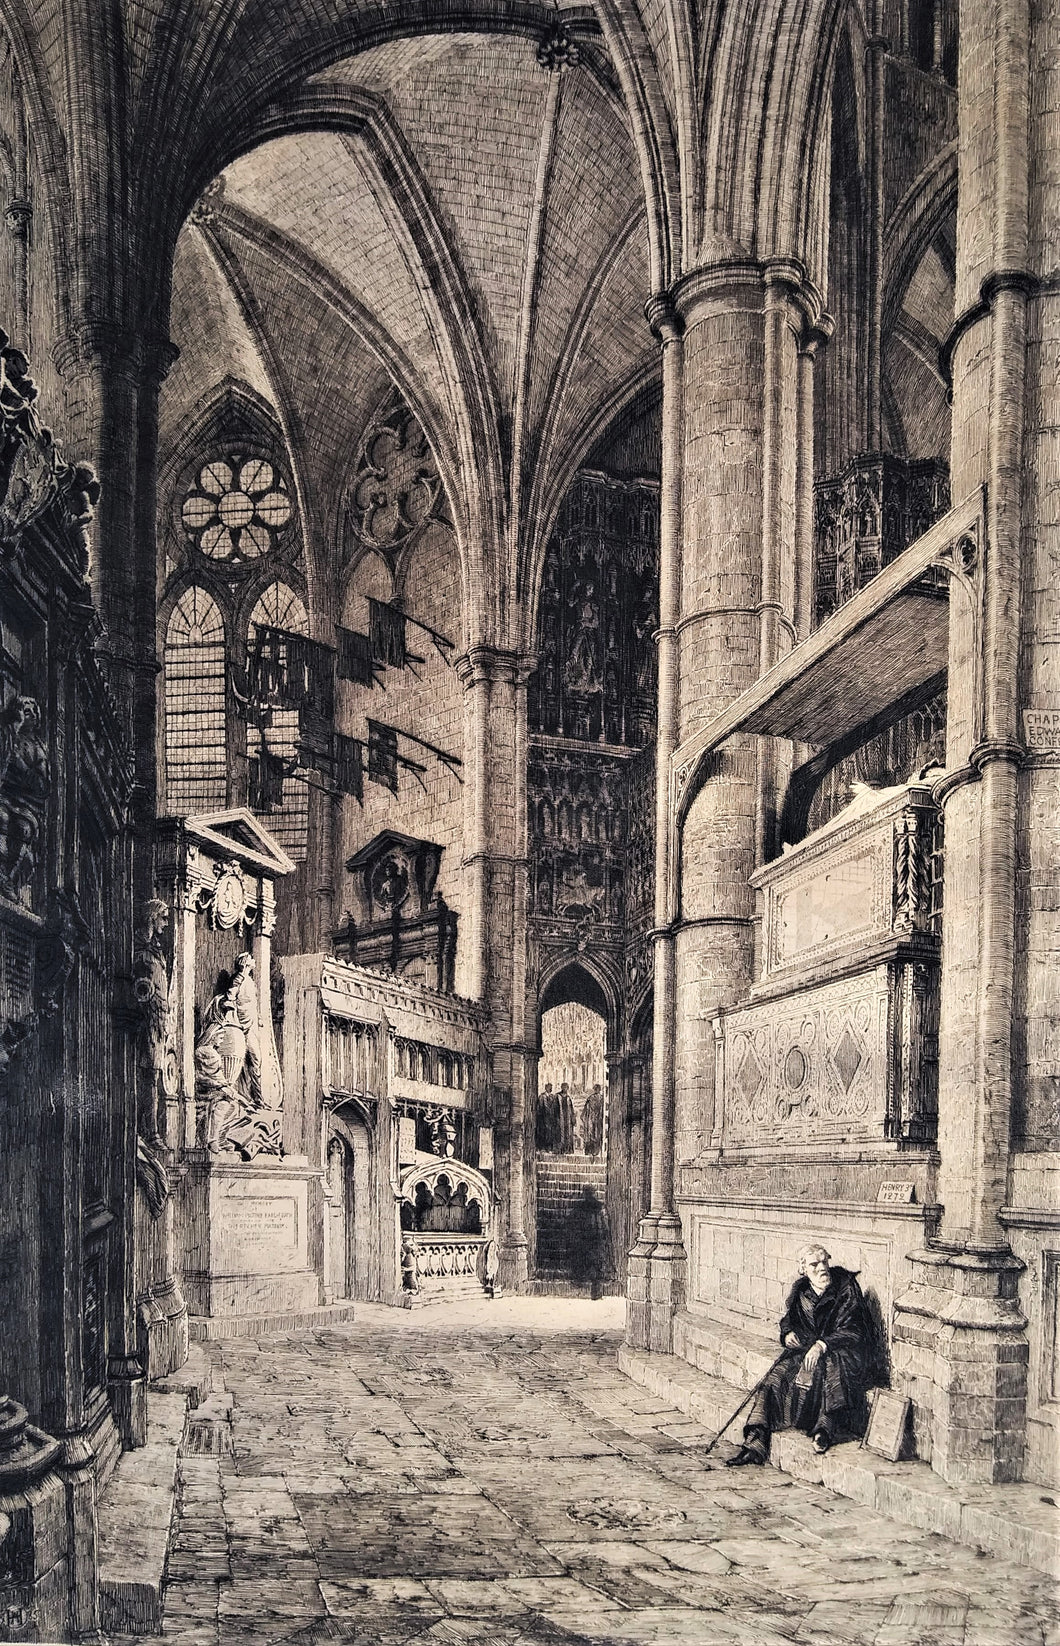 Etching Inside London Cathedral 31 x 22Published 1917, by W.R. Howell & Co, The Gallery, Bedford Row Chambers, W.C. Copyright. Printed by Chas. Welch